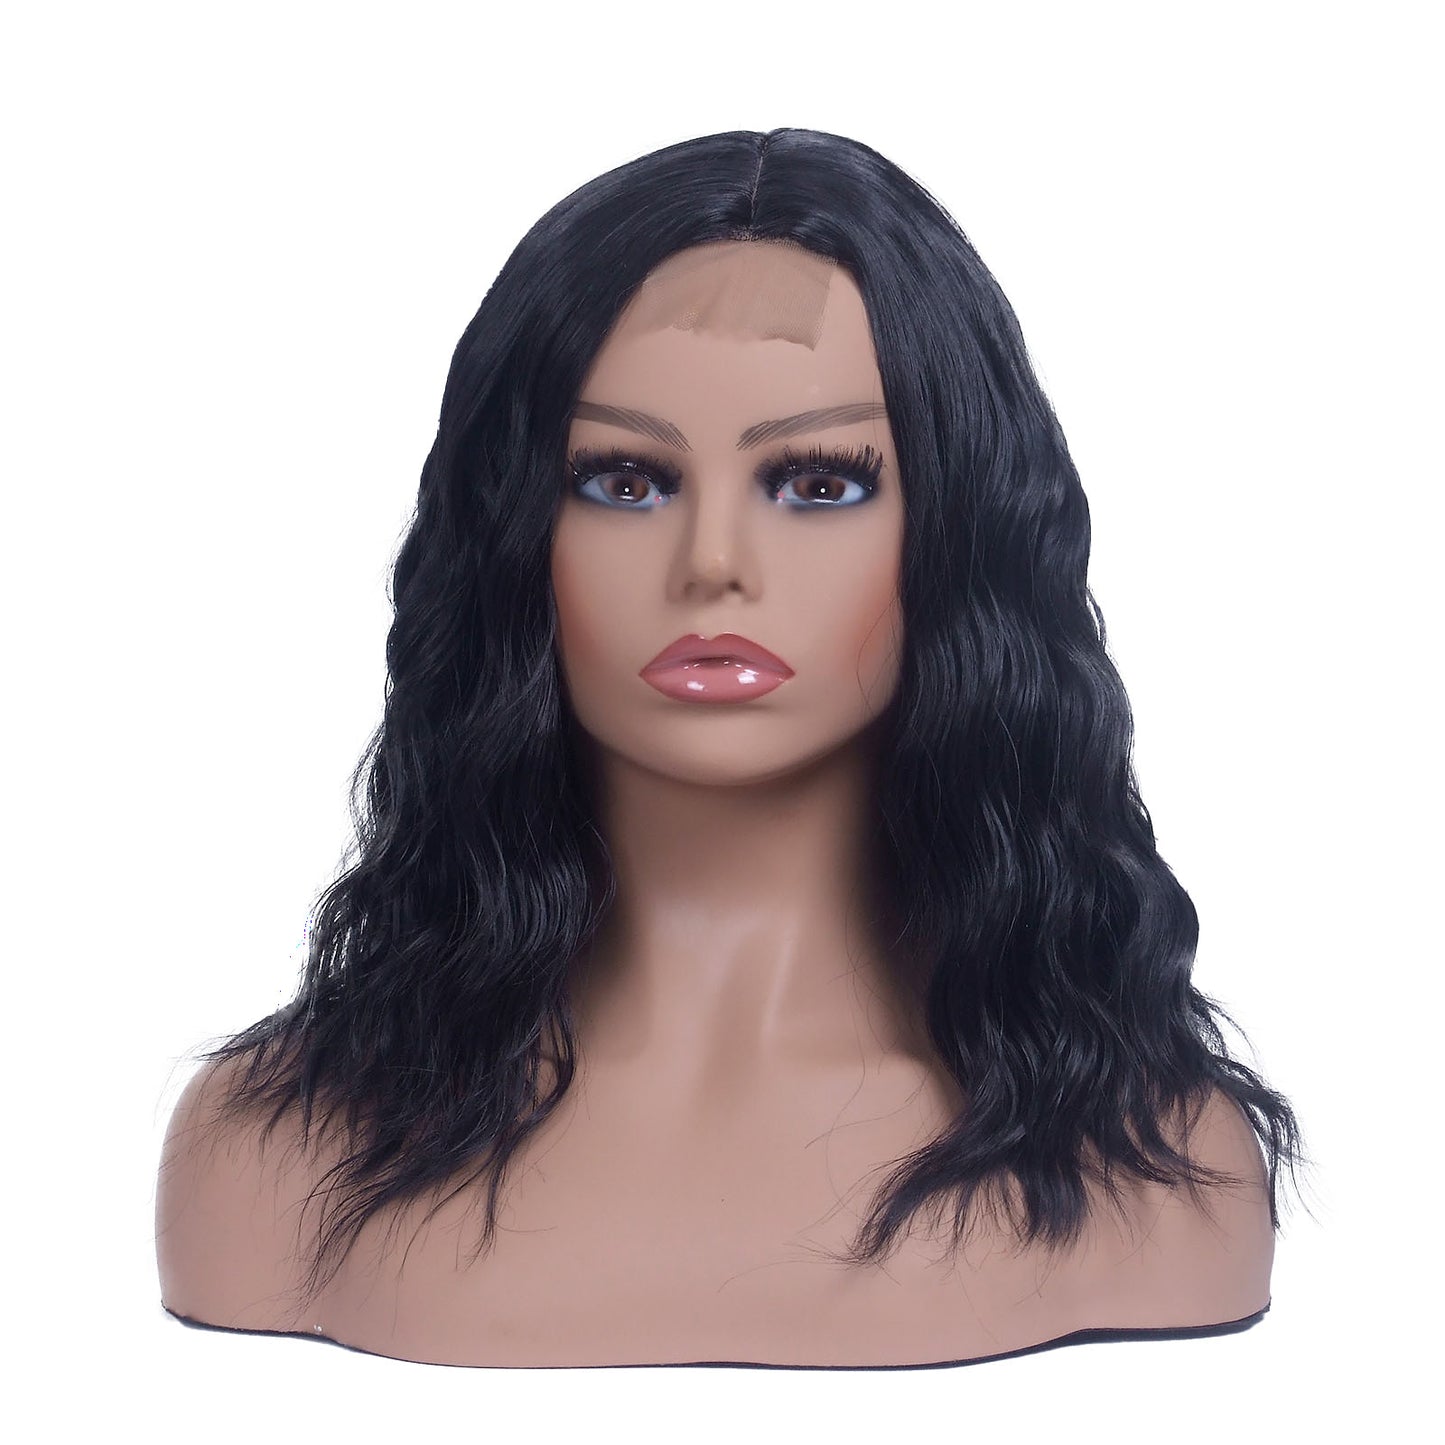 LINGDORA Black Middle Part Curly Short Wigs for Women